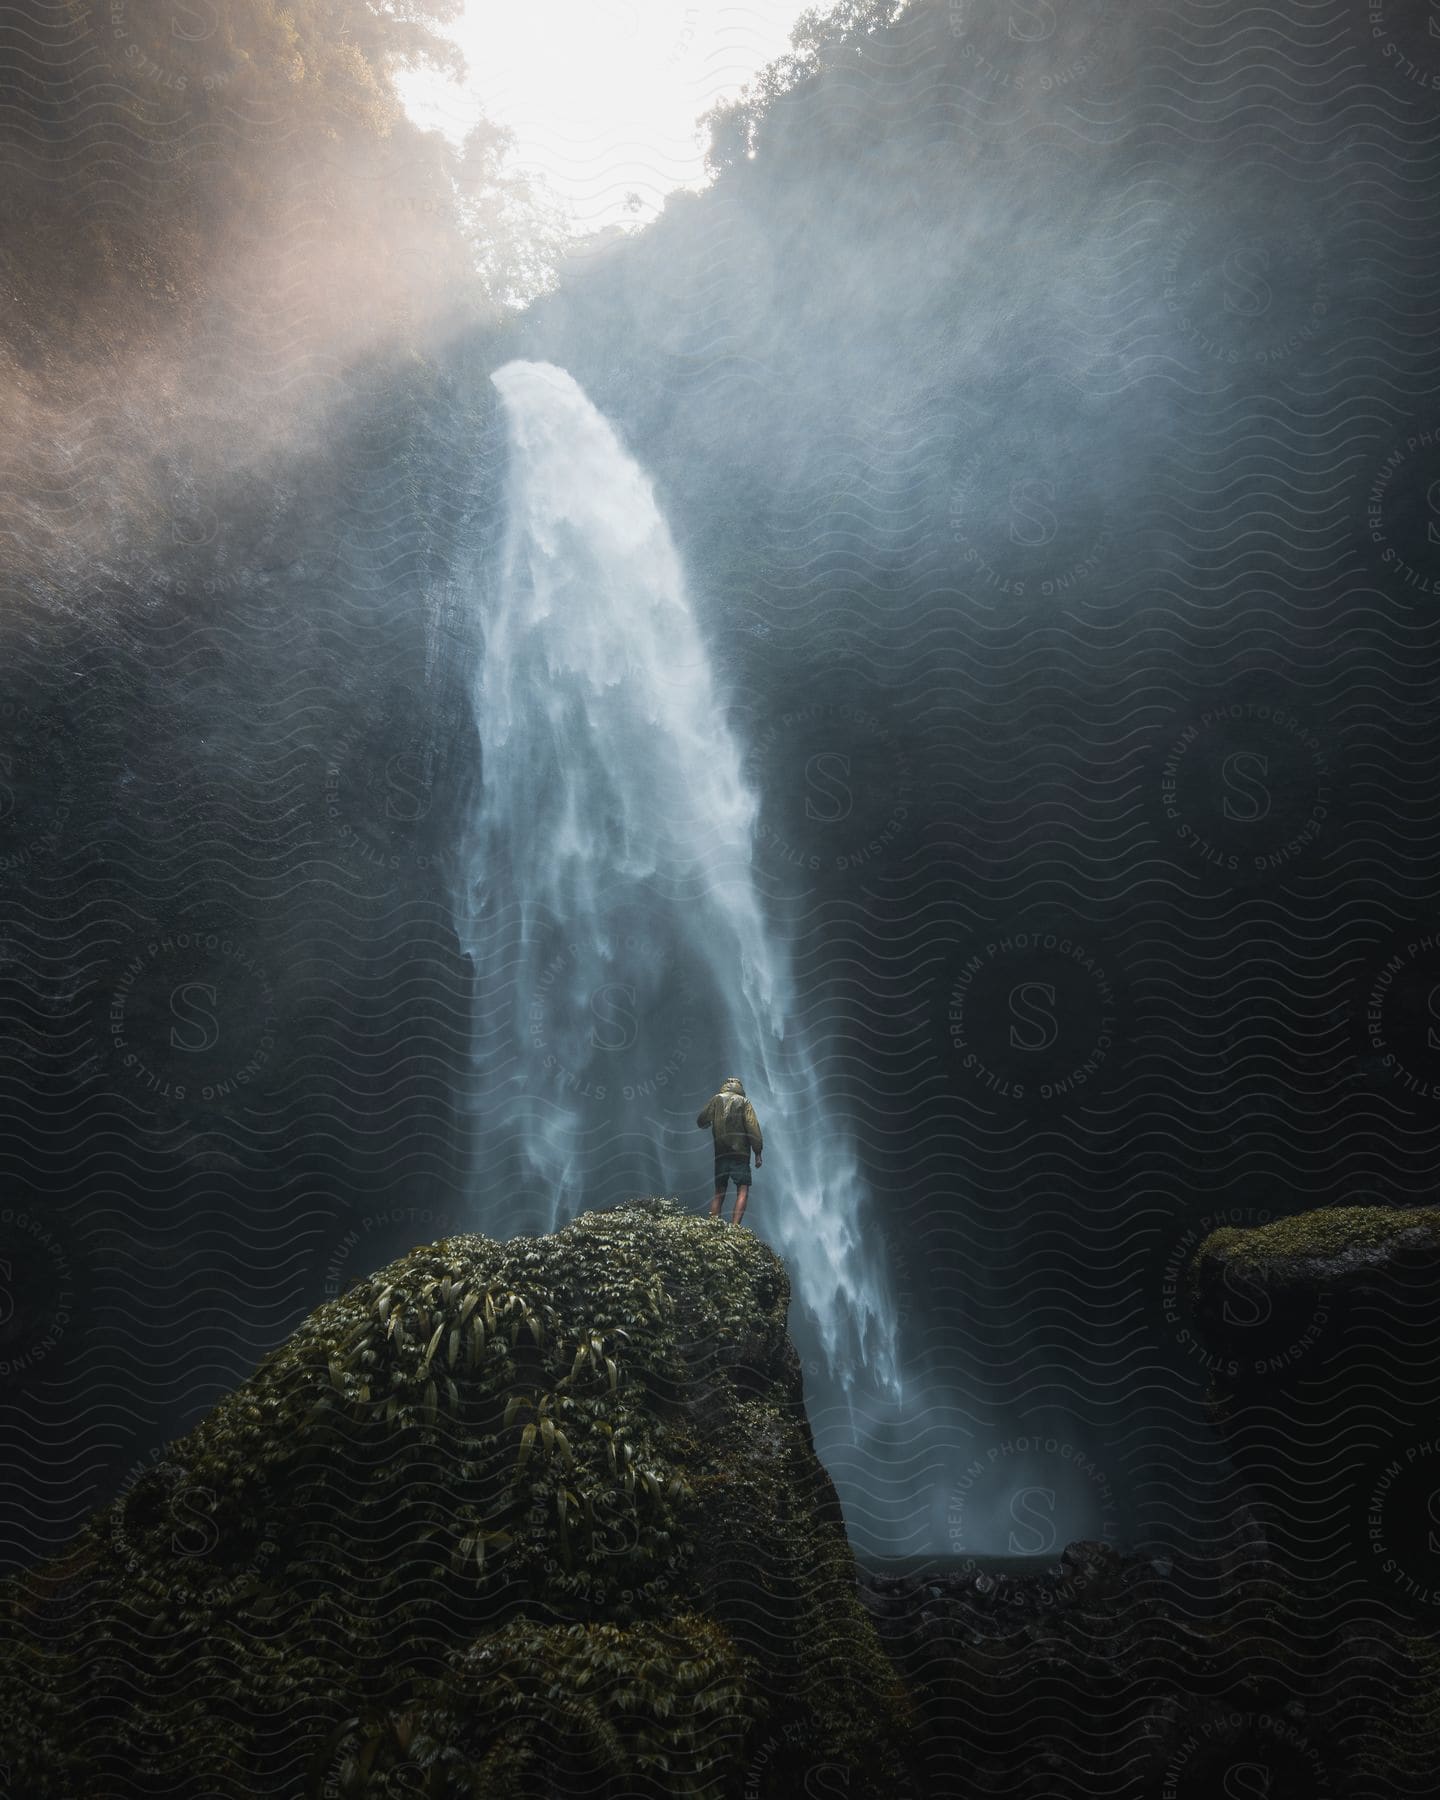 A person stands on a mountain facing a majestic waterfall amidst beautiful scenery